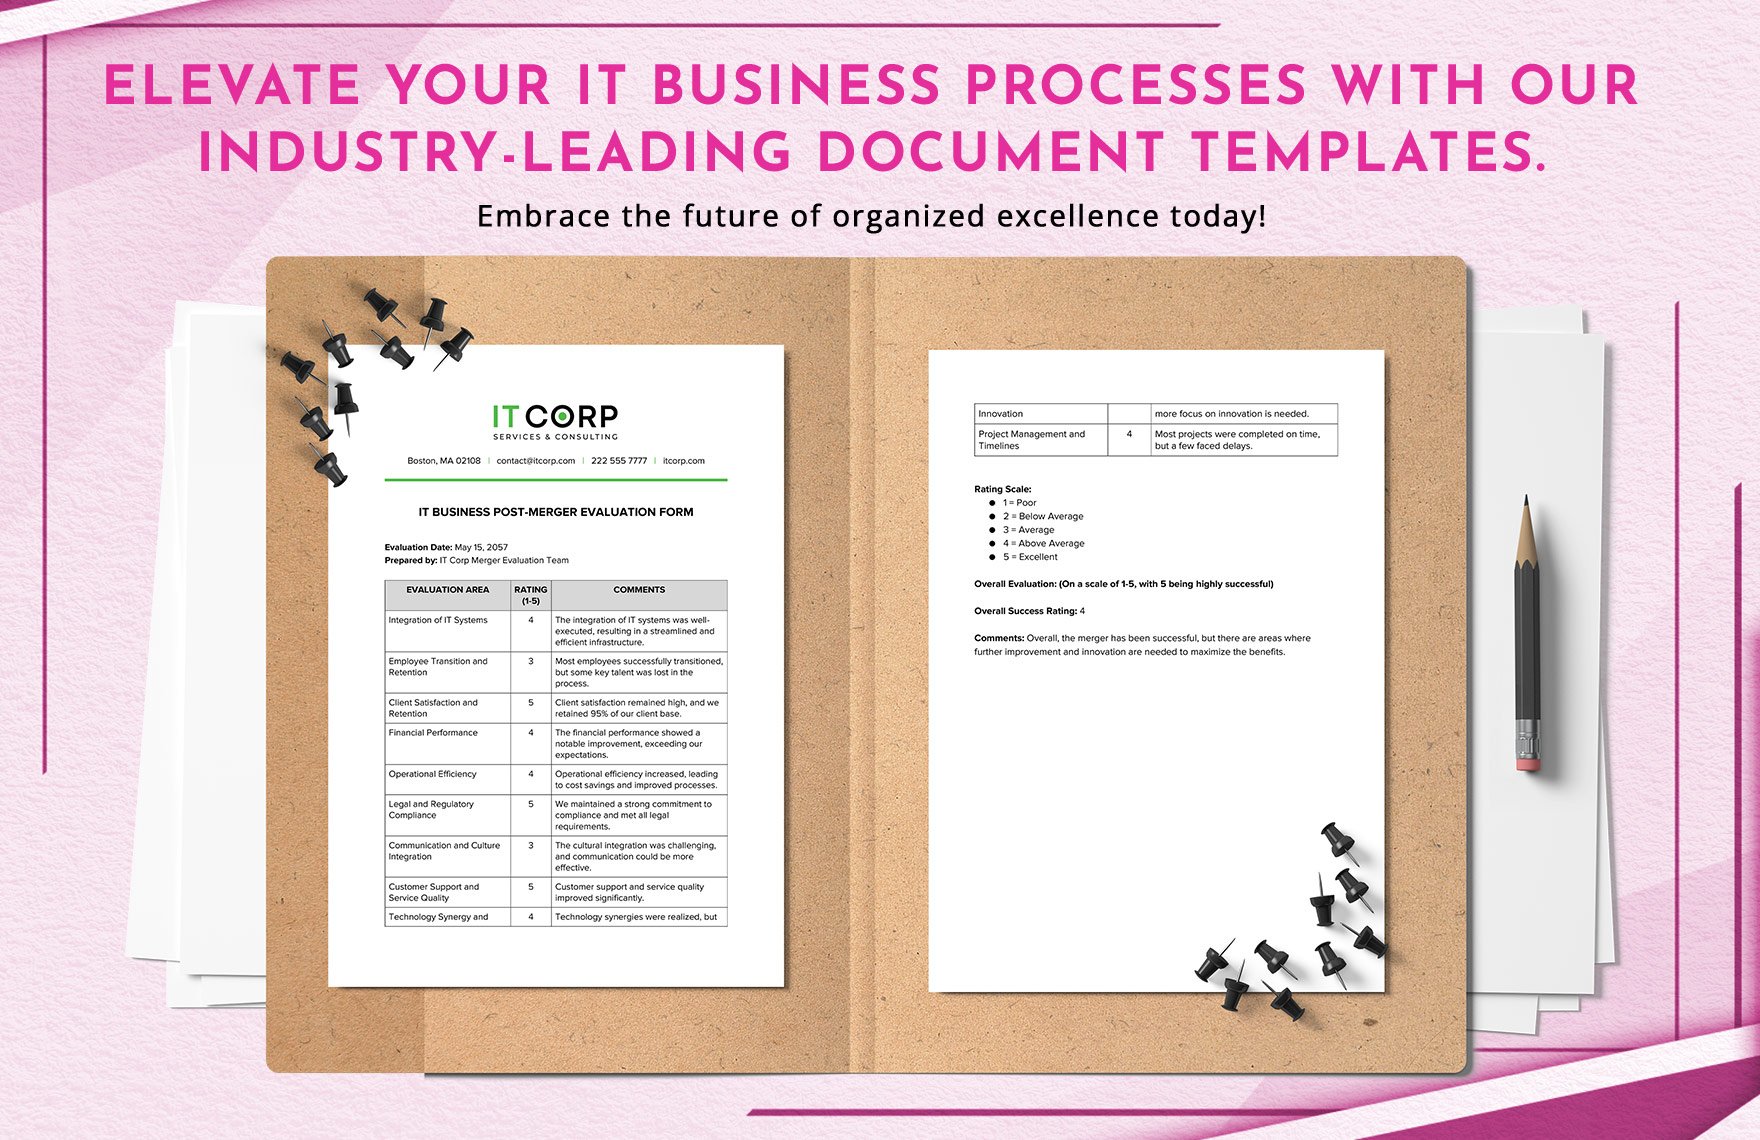 IT Business Post-Merger Evaluation Form Template